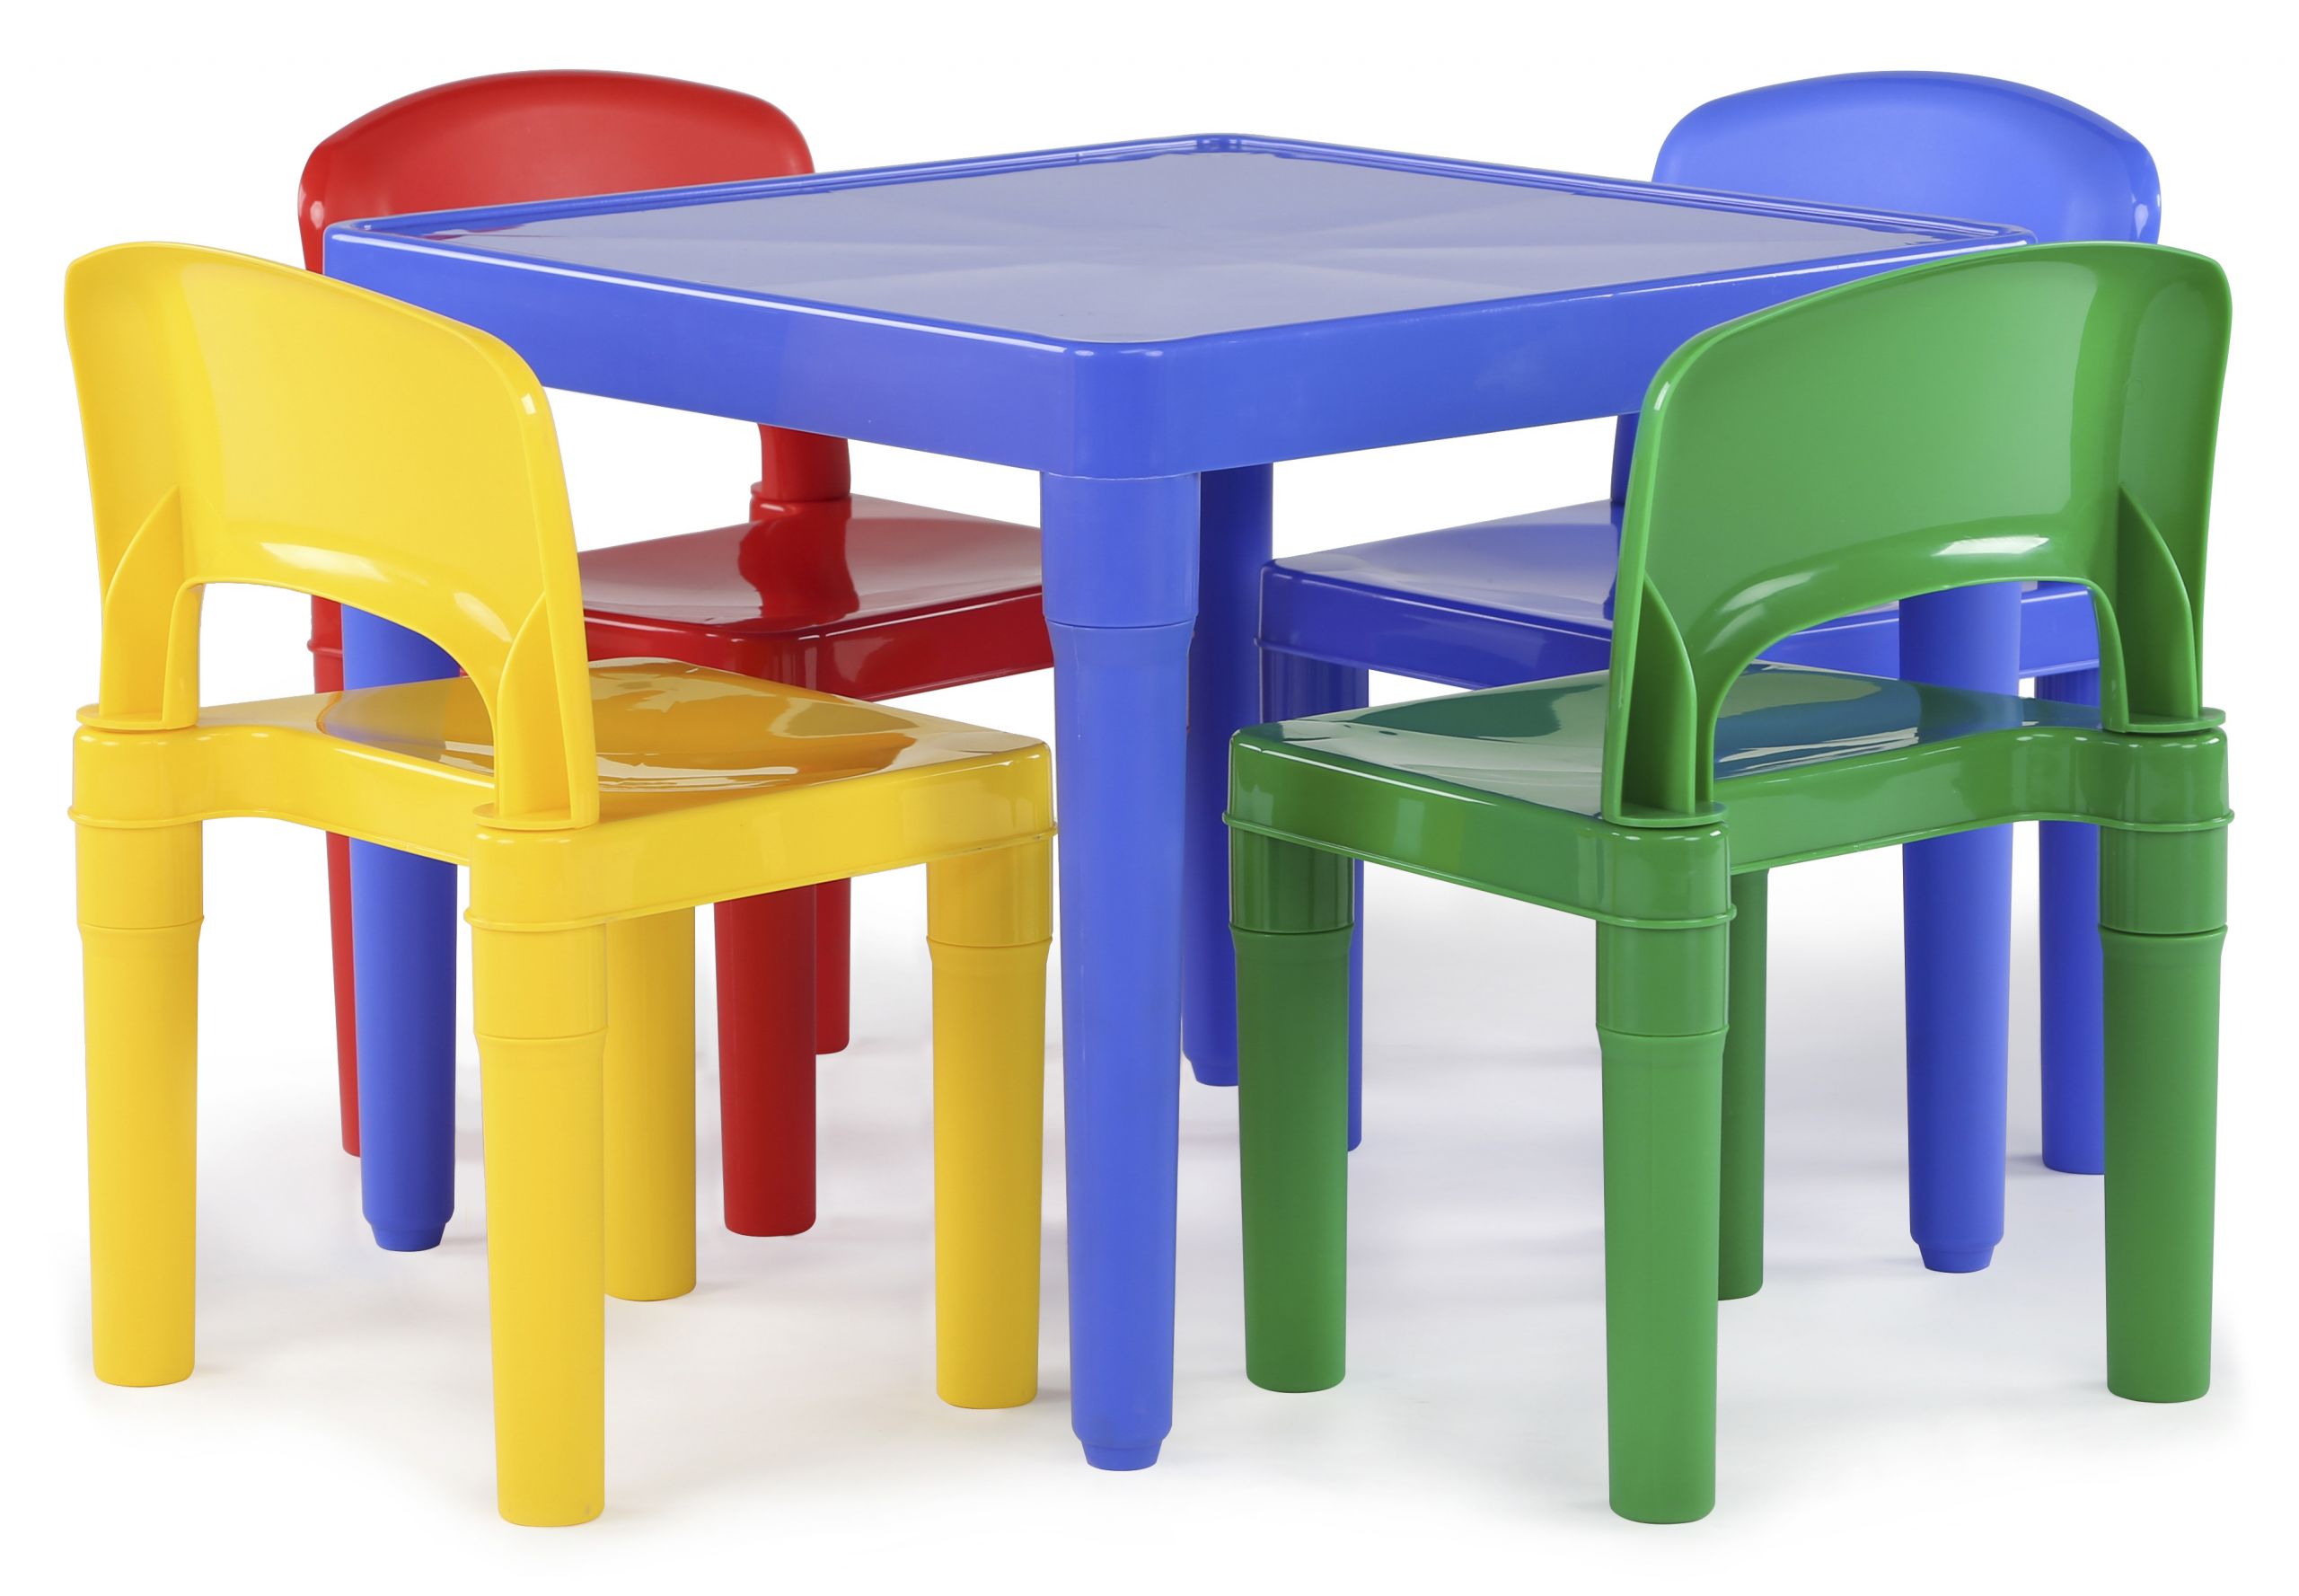 Kids Desk Table
 Tot Tutors Kids Plastic Table and 4 Chairs Set Primary Colors